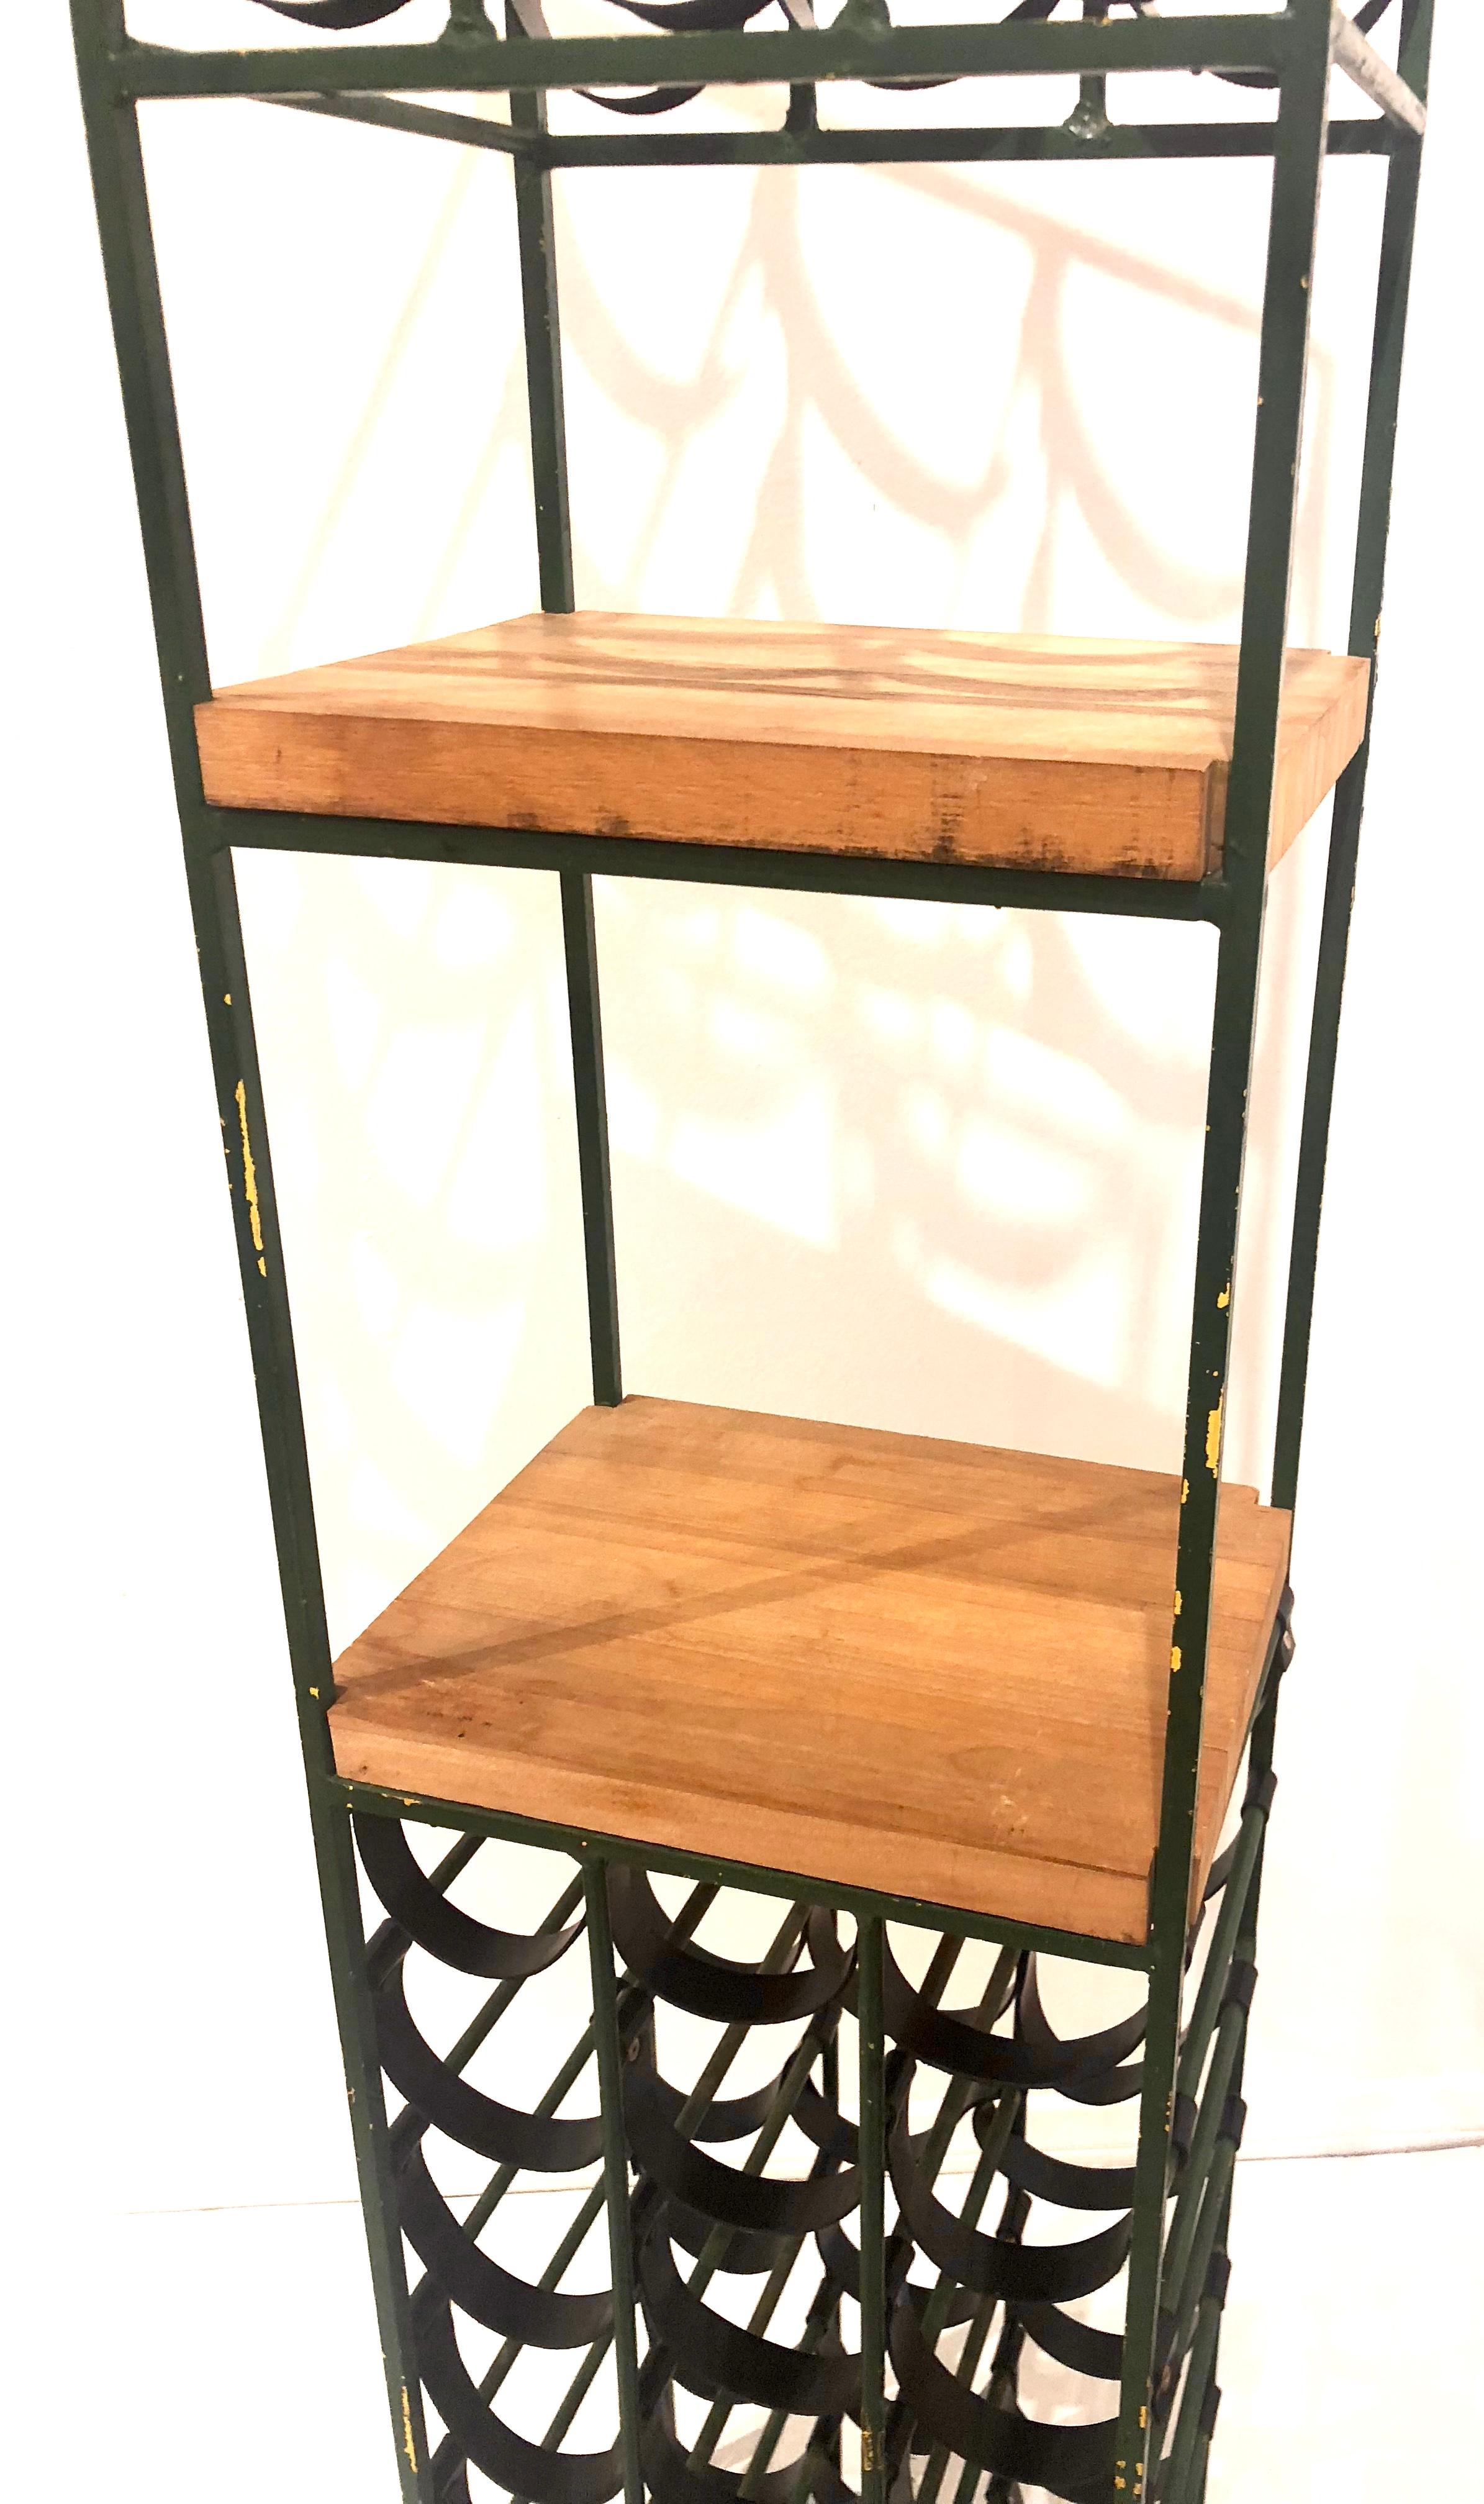 Tower wine rack by Arthur Umanoff, made of wrought iron with new black leather straps, two butcher block shelves for cutting or display, holds 30 bottles each. It has its original painted finish its distressed look in a green yellow finish, we